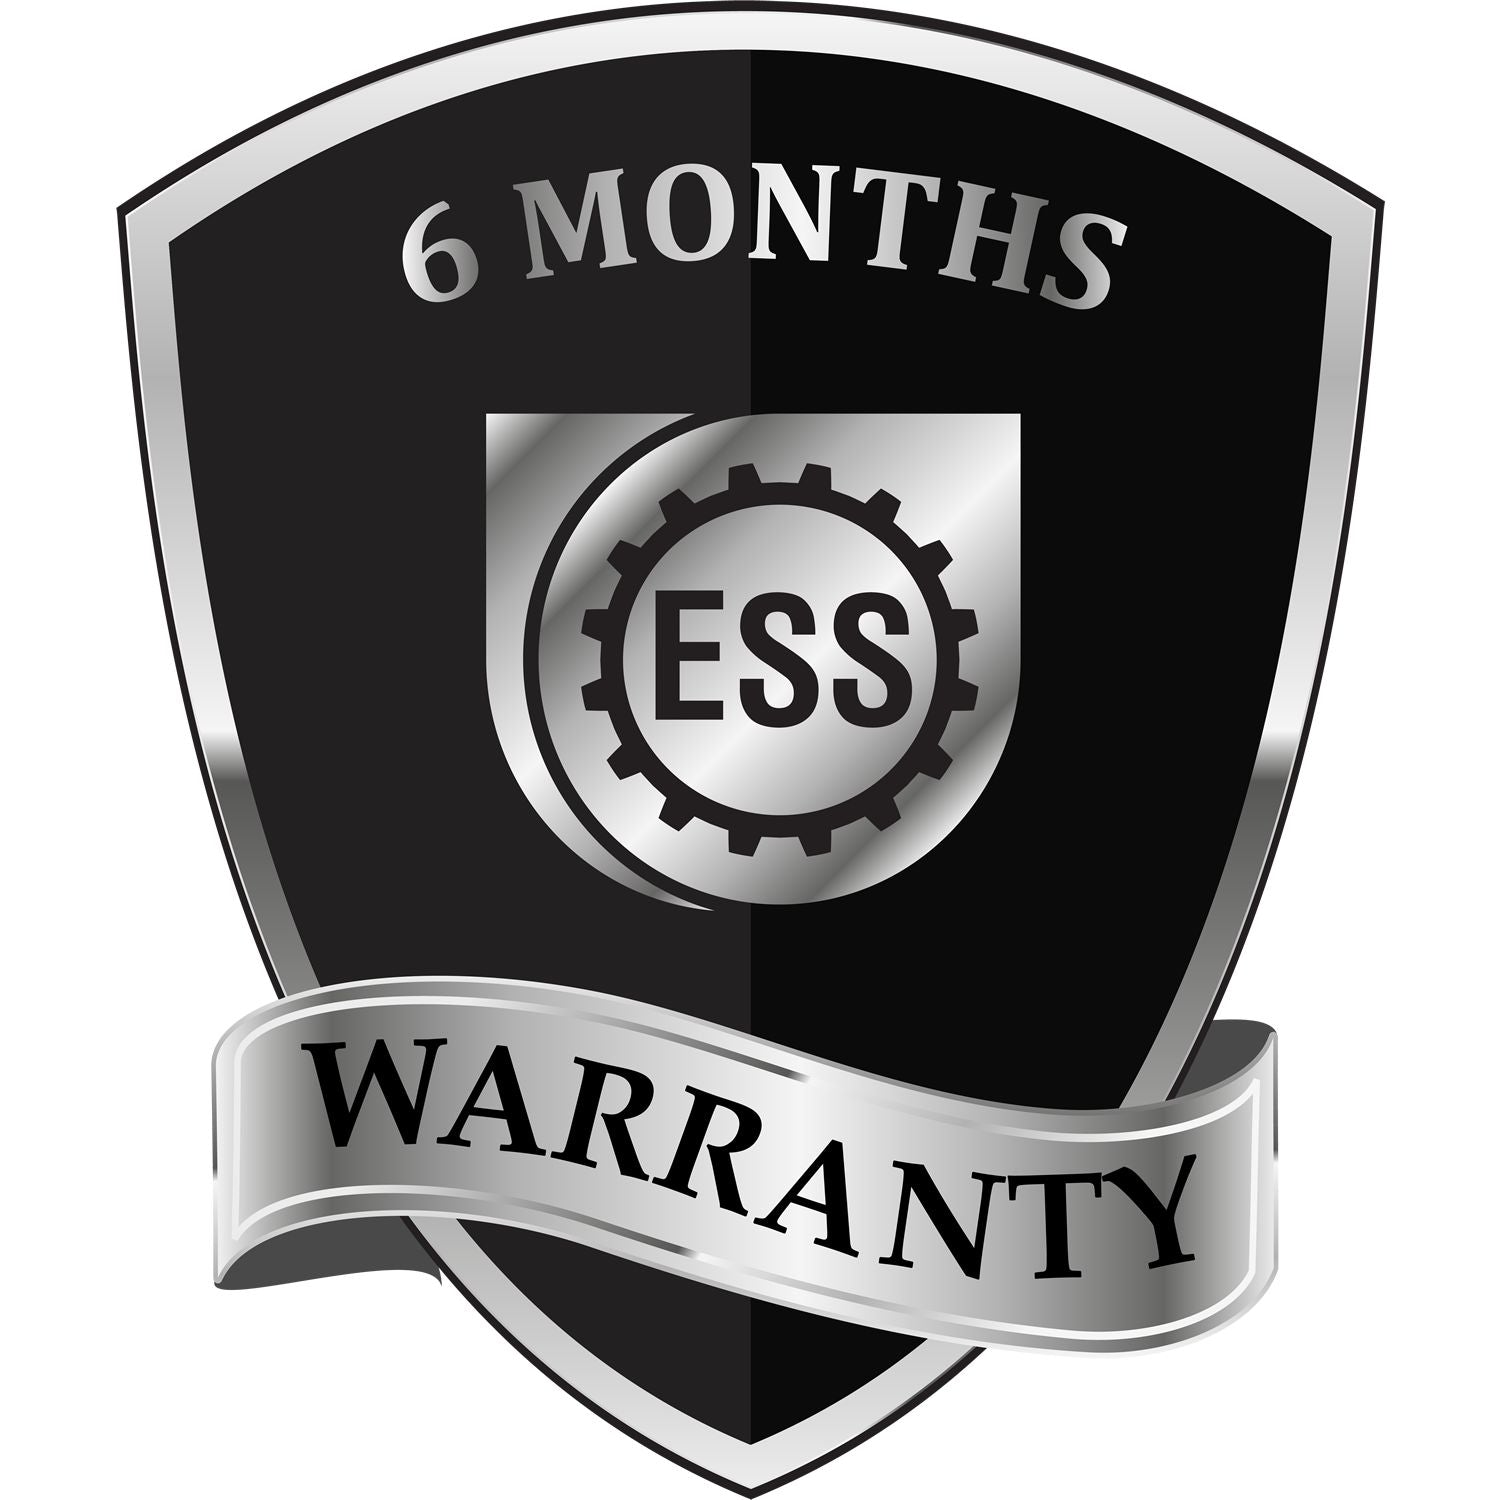 A badge or emblem showing a warranty icon for the Nevada Professional Engineer Seal Stamp